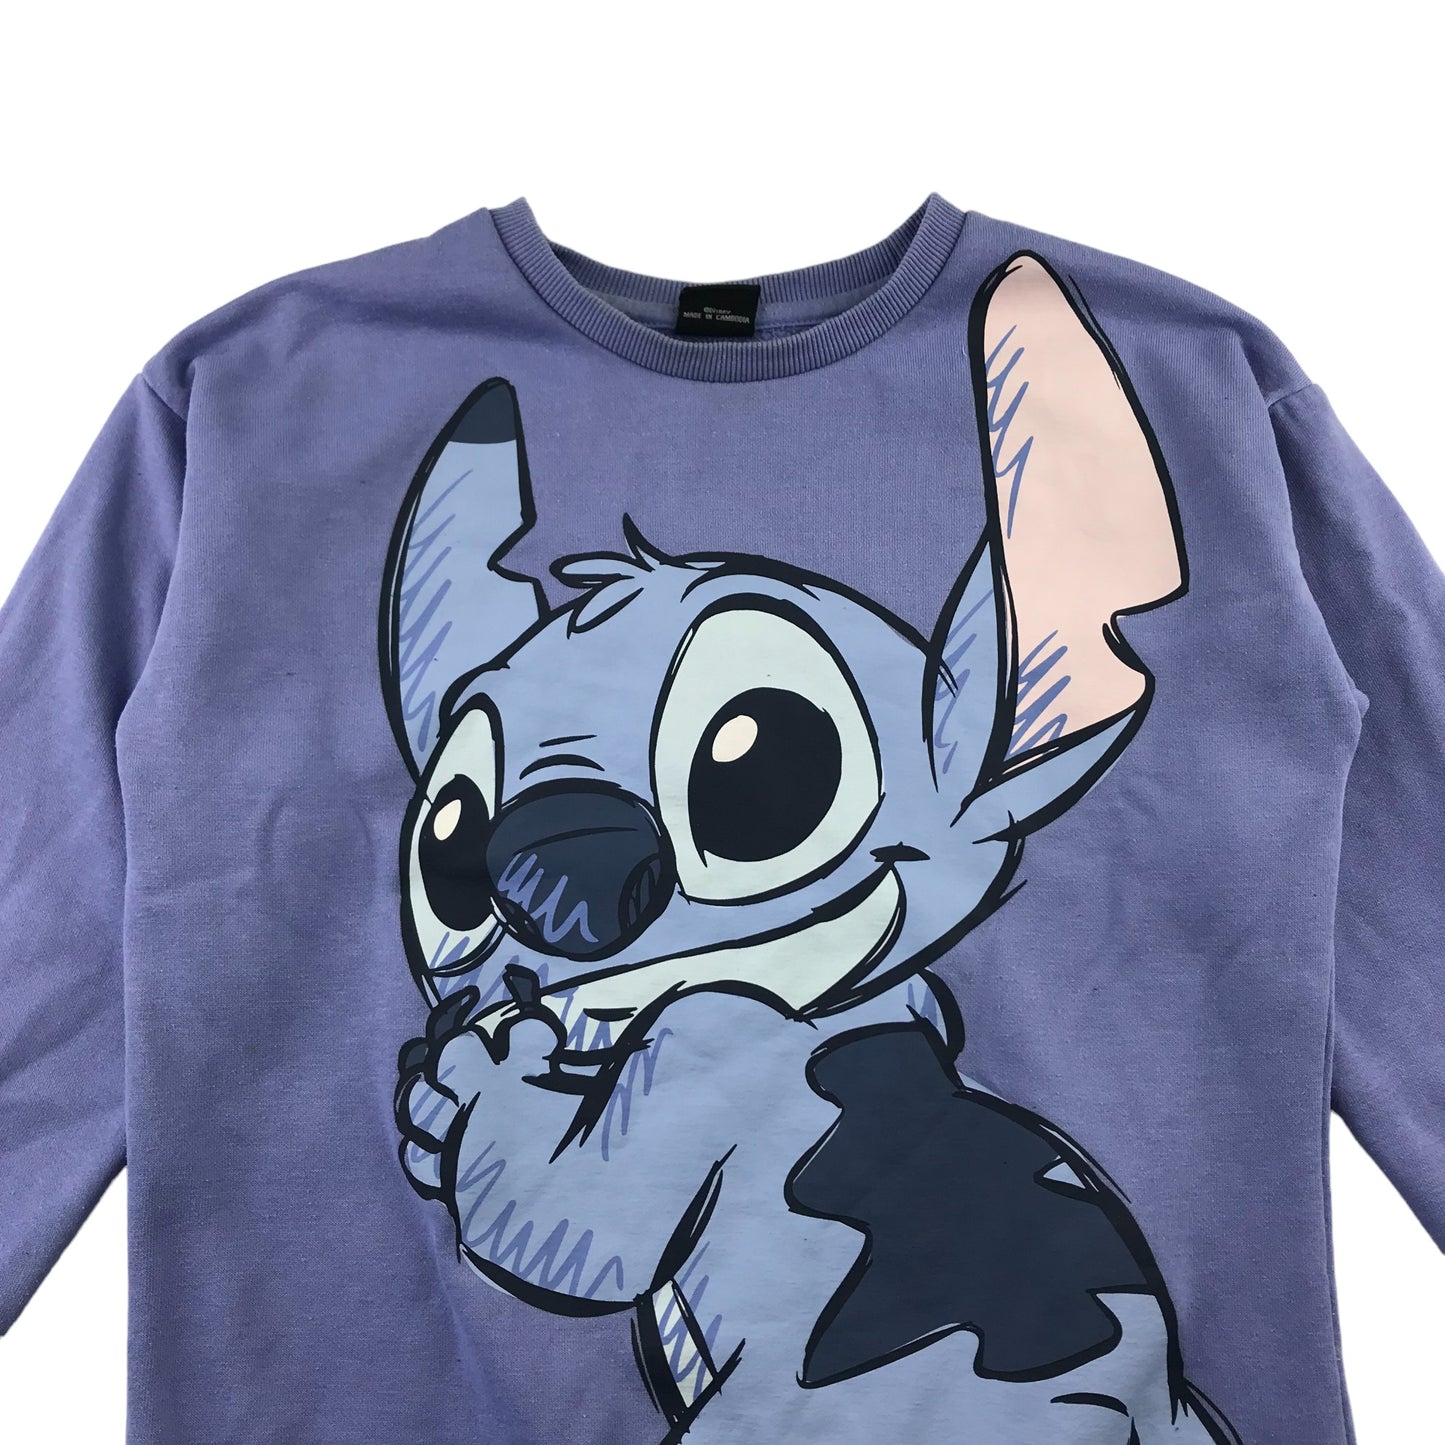 Primark Jersey Sweater Age 11 Lilacy Blue with Disney Lilo and Stitch Graphic